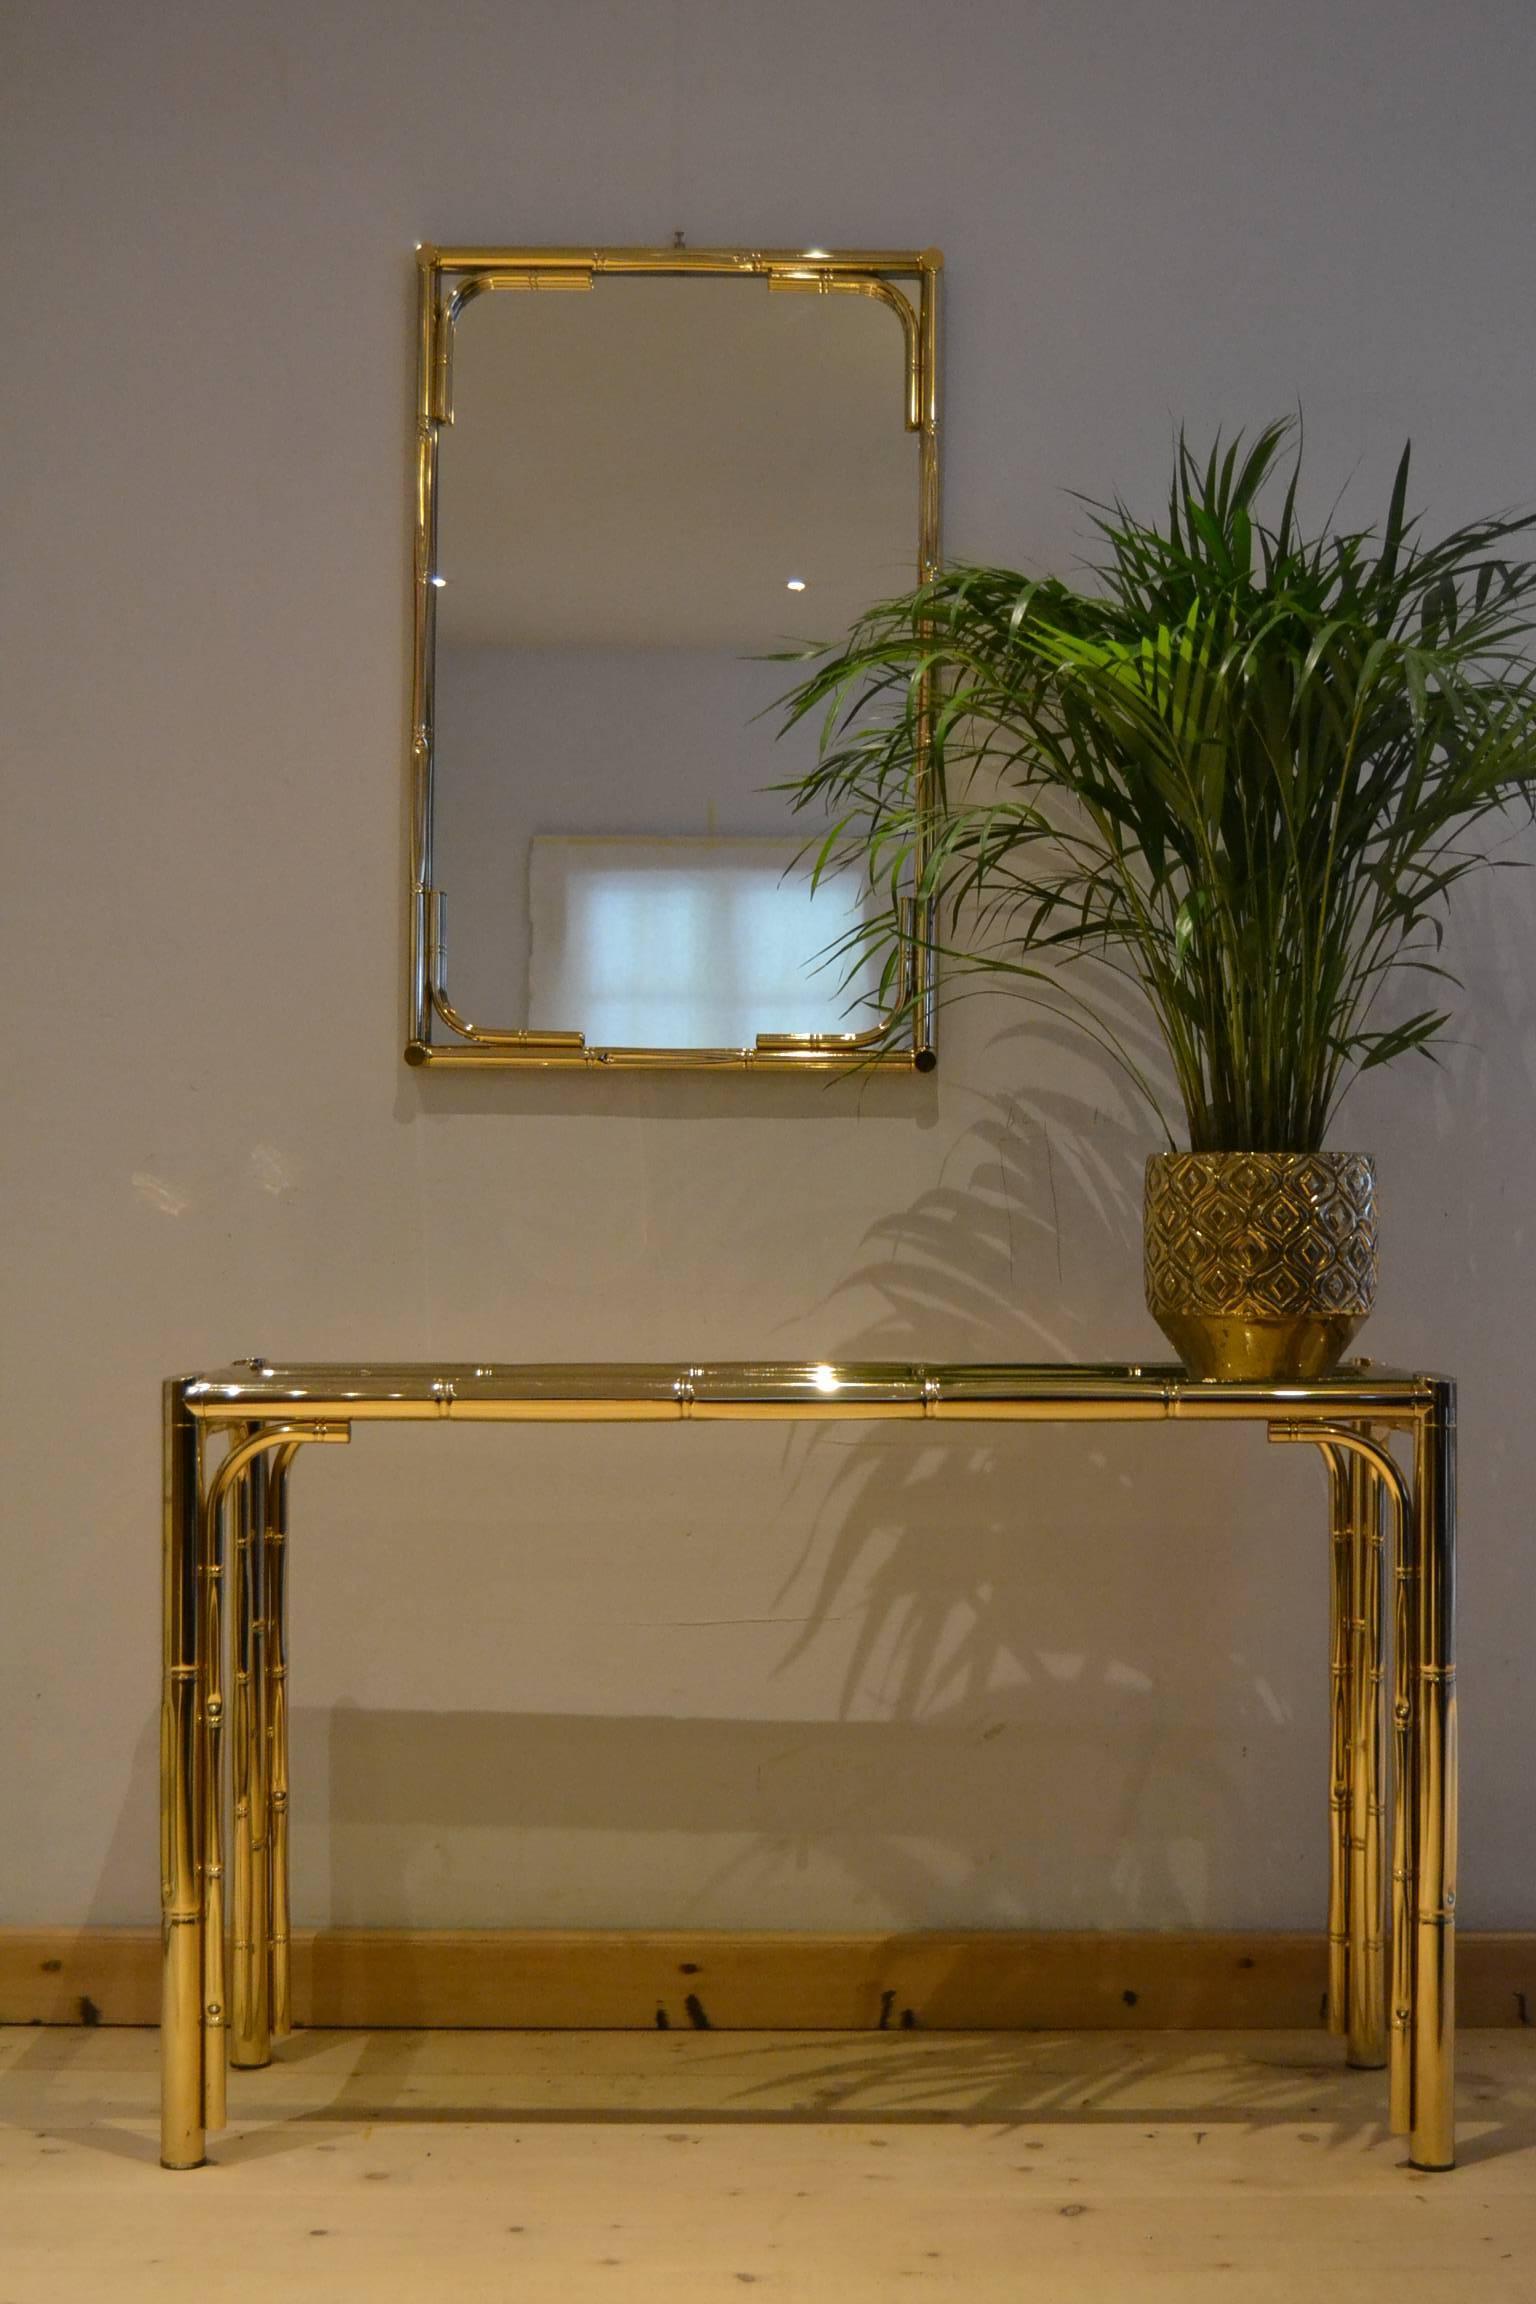 Elegant set of metal faux bamboo console table and mirror,
made in Italy in the 1970s.
The metal has a gold color, what makes this set very stylish.
The table, side table has a smoked glass top.  

This elegant set can be used to place in an